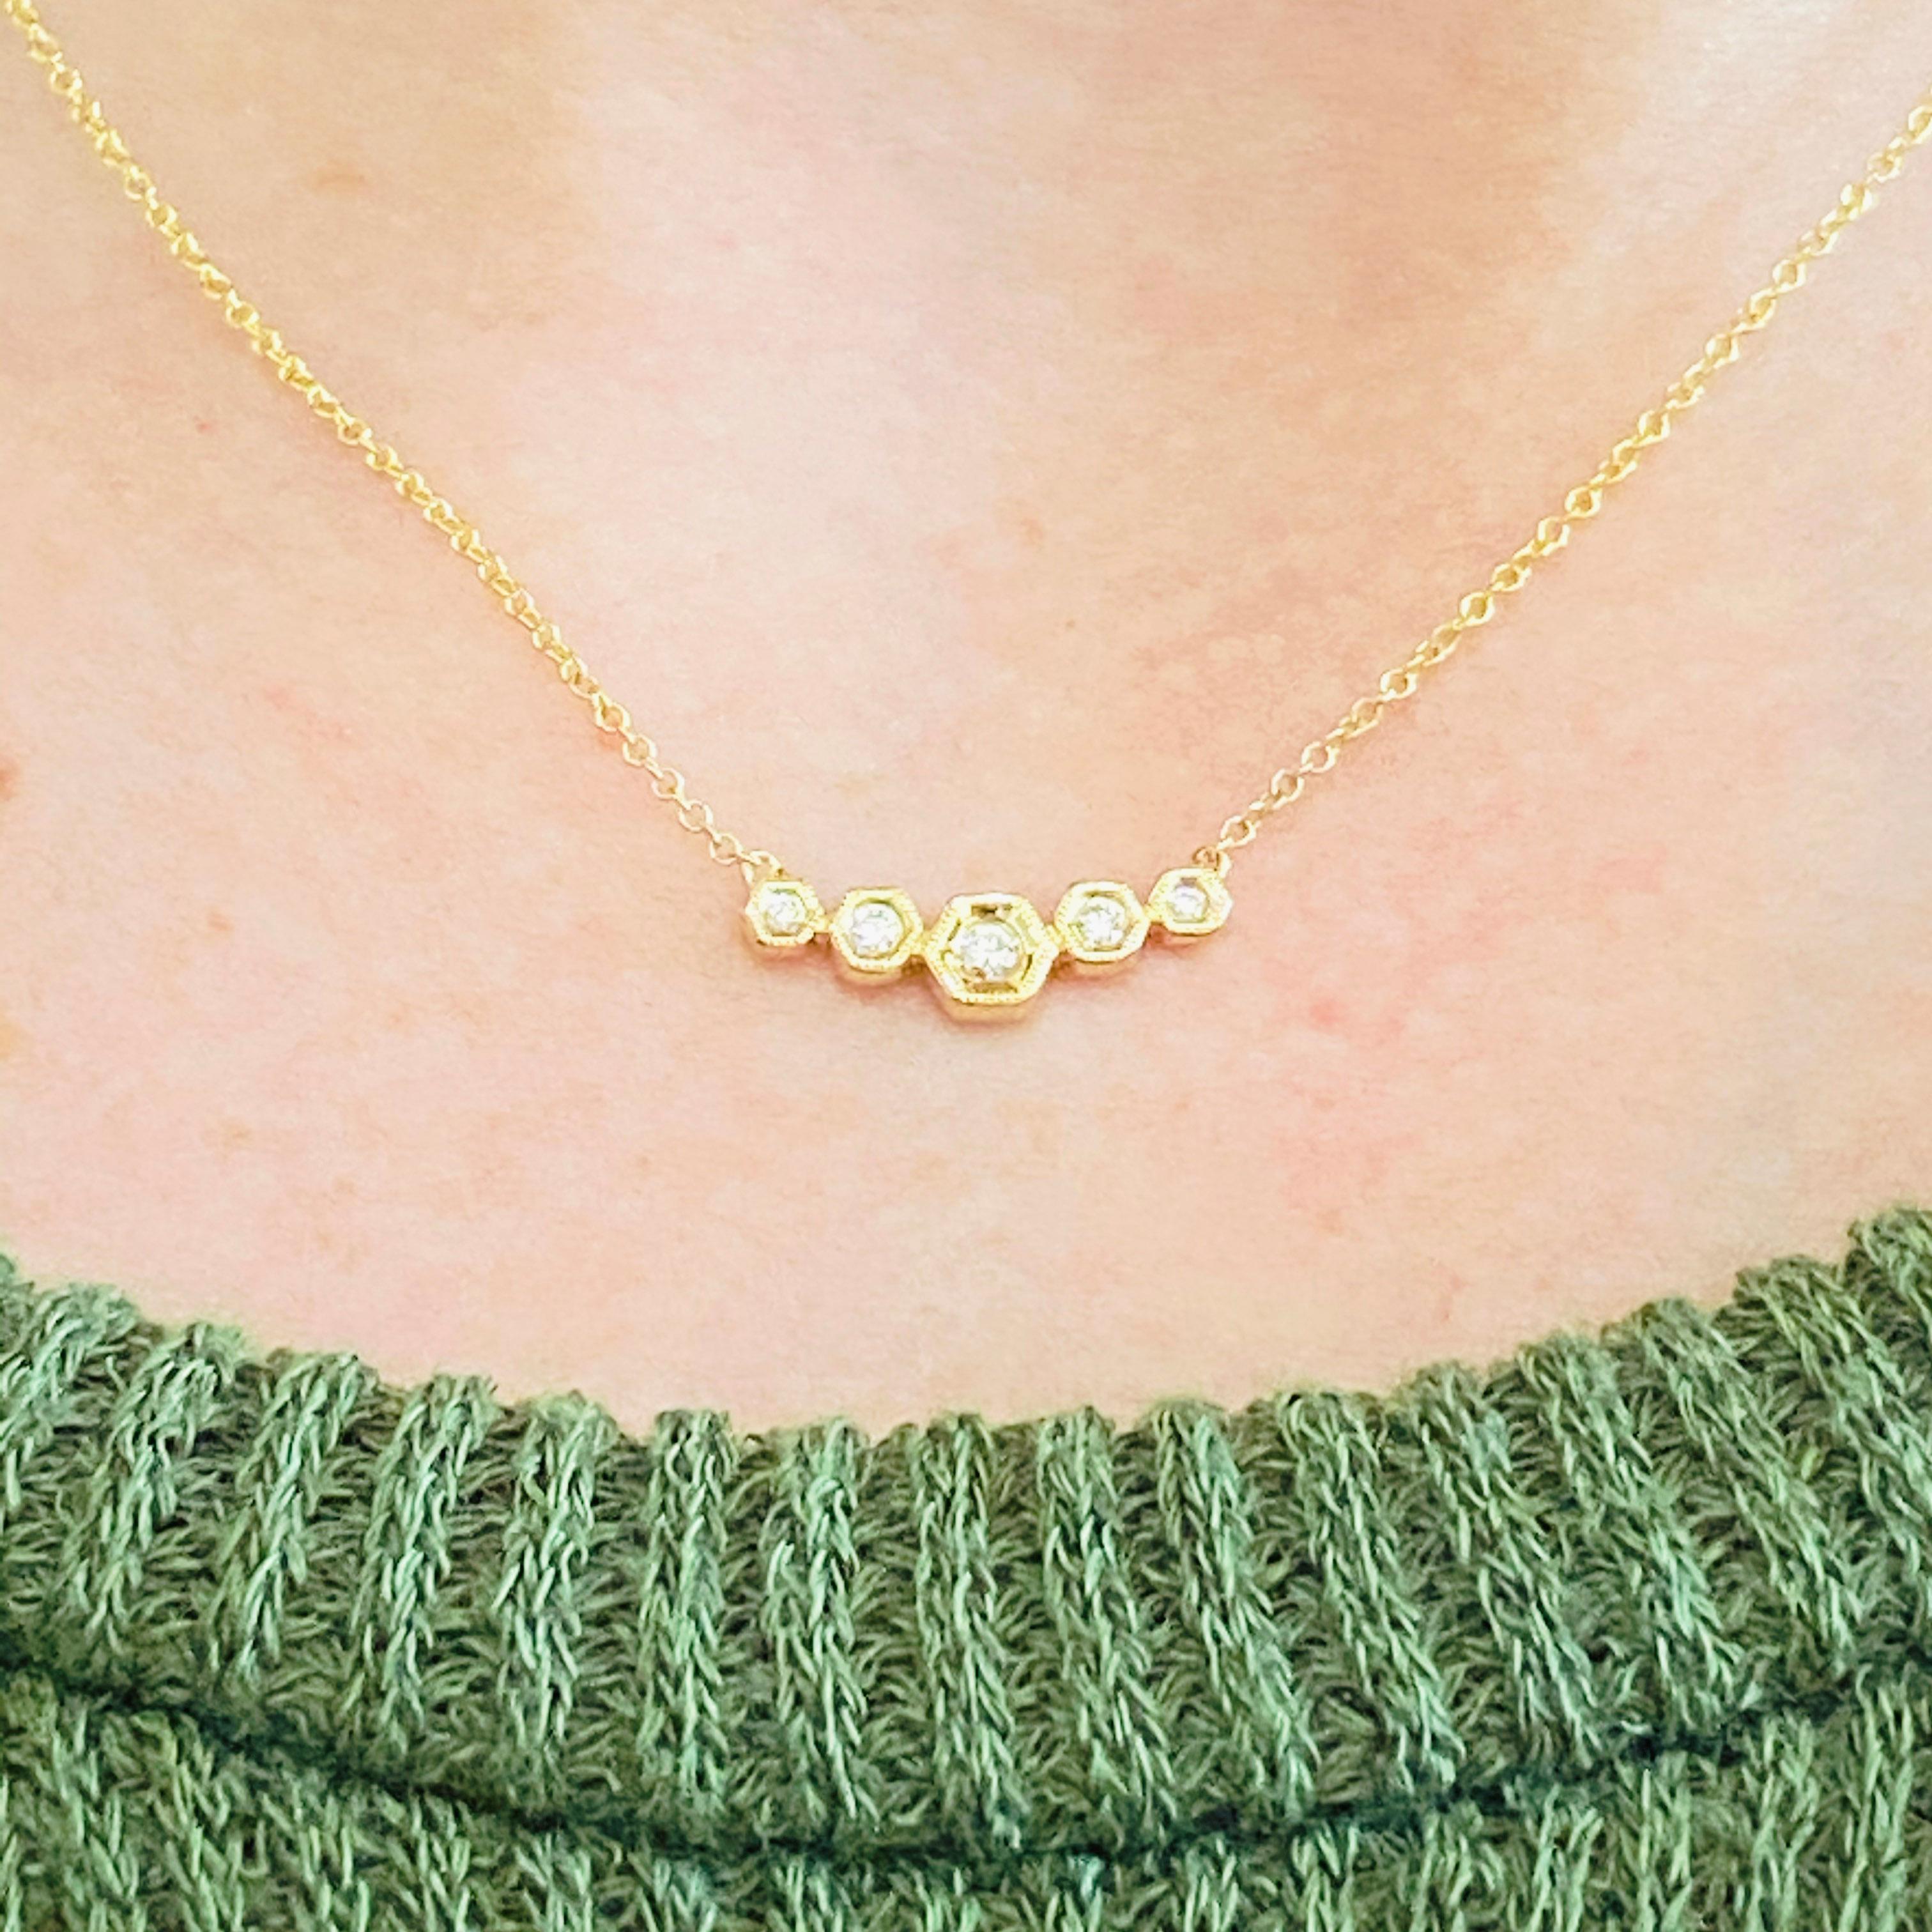 This Gabriel & Co. designer necklace is a gorgeous 14k yellow gold hexagonal bar necklace dripping with diamonds is the perfect mix between classic and trendy! This necklace is very fashionable and can add a touch of style to any outfit, yet it is